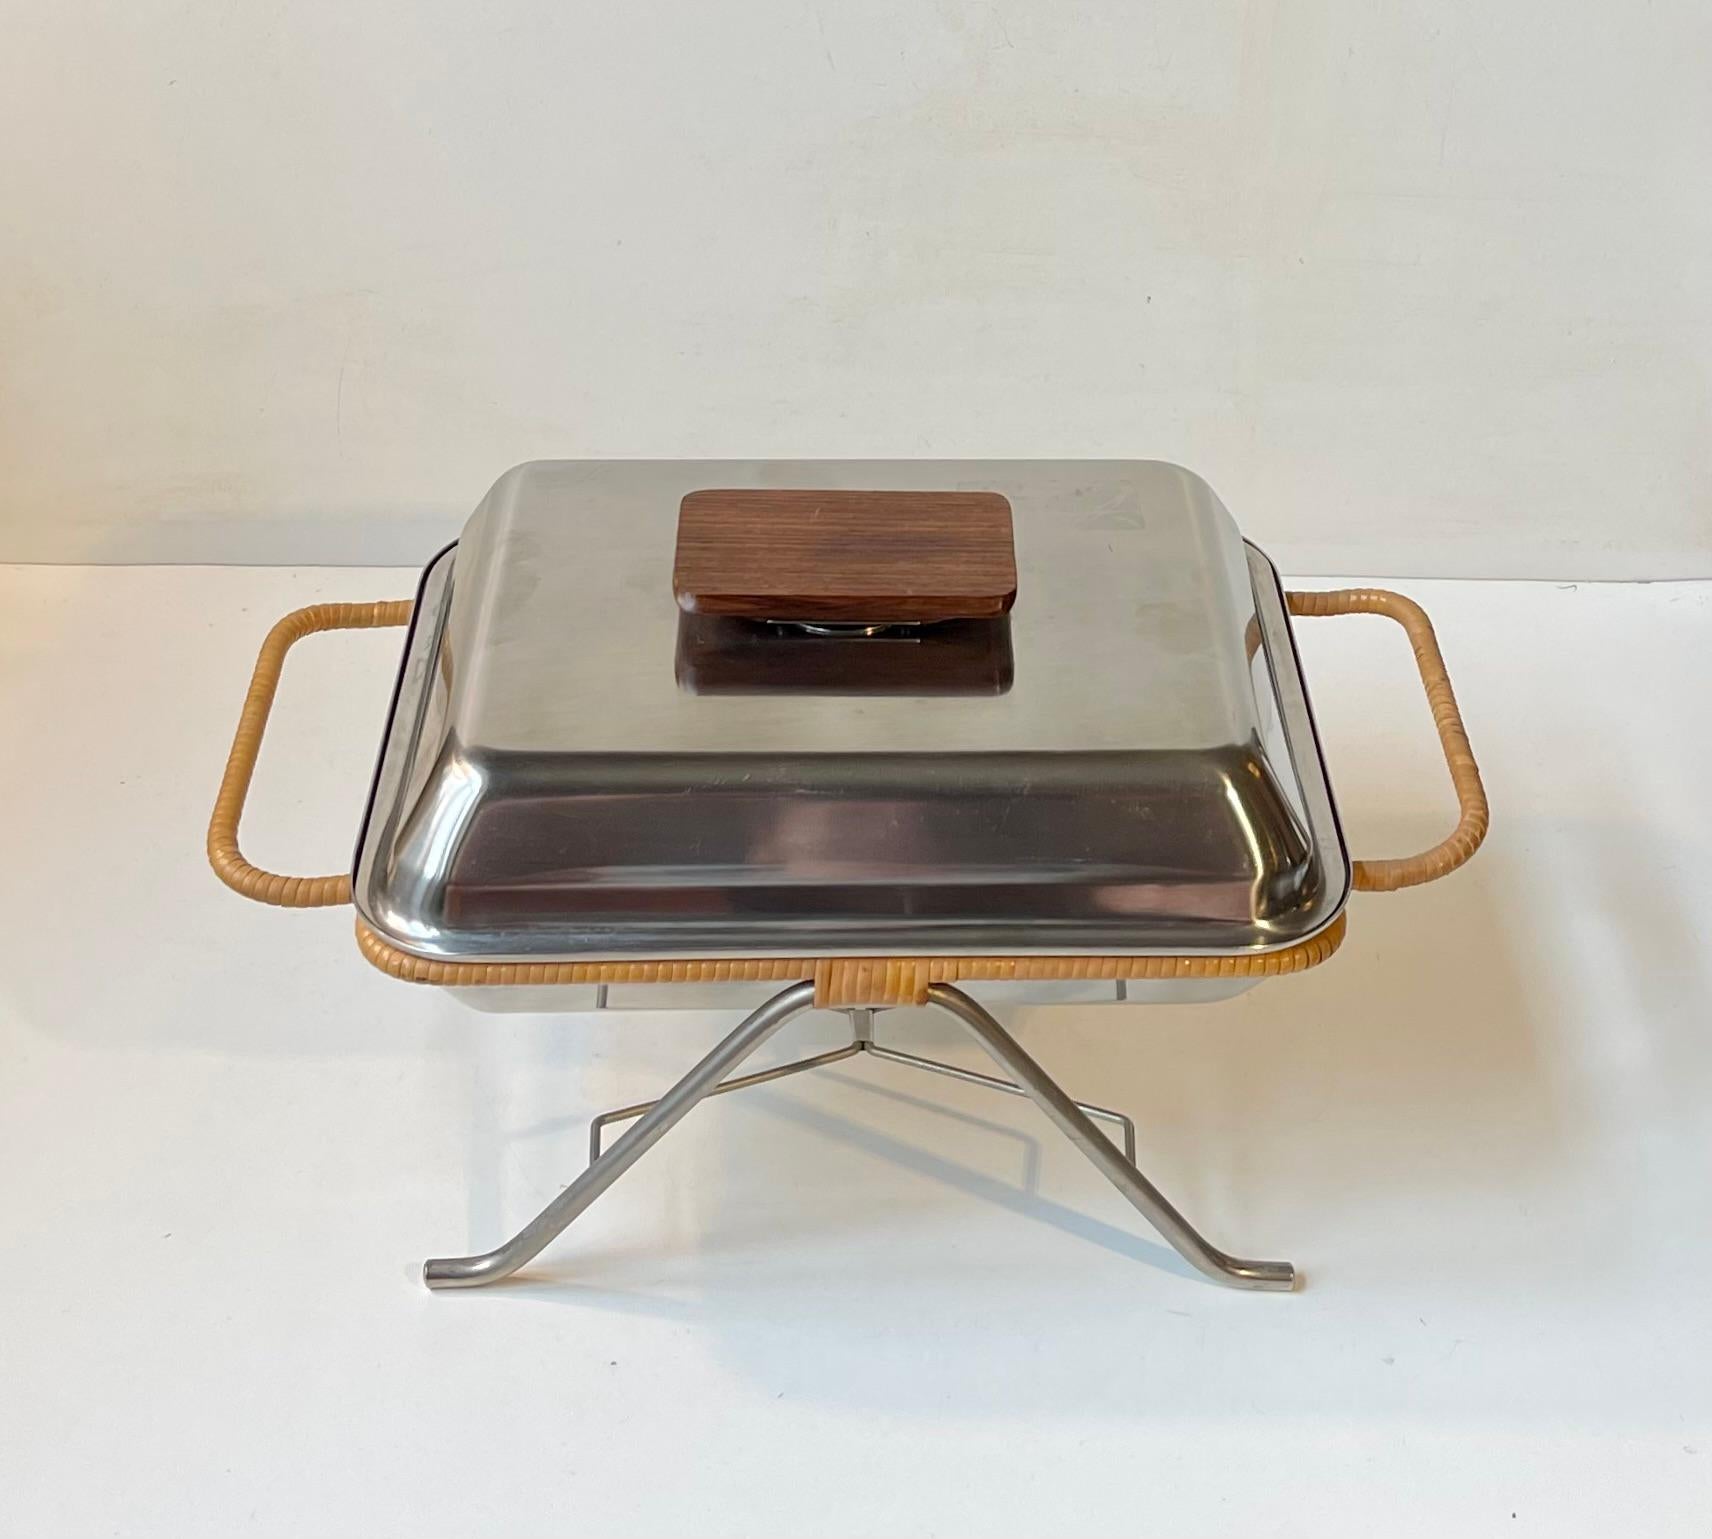 A very rare domed dinner serving tray or cloche in brushed stainless steel and a jumbo handle in solid teak. The holder/base is also fashioned from stainless steel and it features twisted rattan around its sides and handles. The center of the base